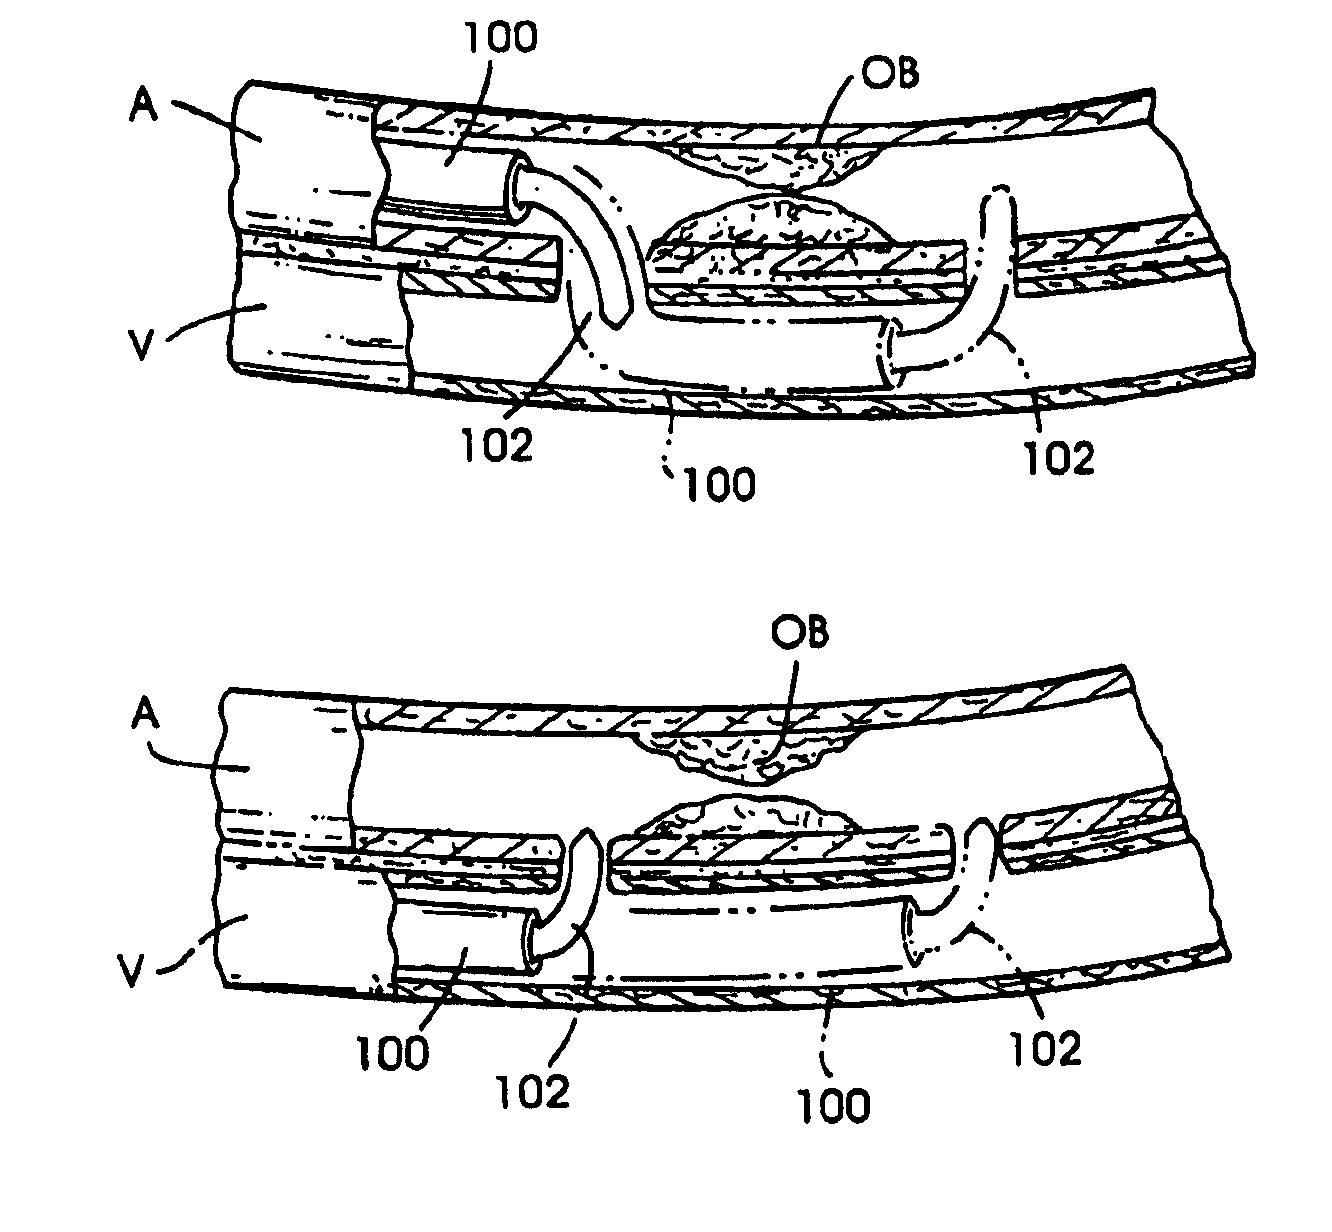 Methods and apparatus for bypassing arterial obstructions and/or performing other transvascular procedures